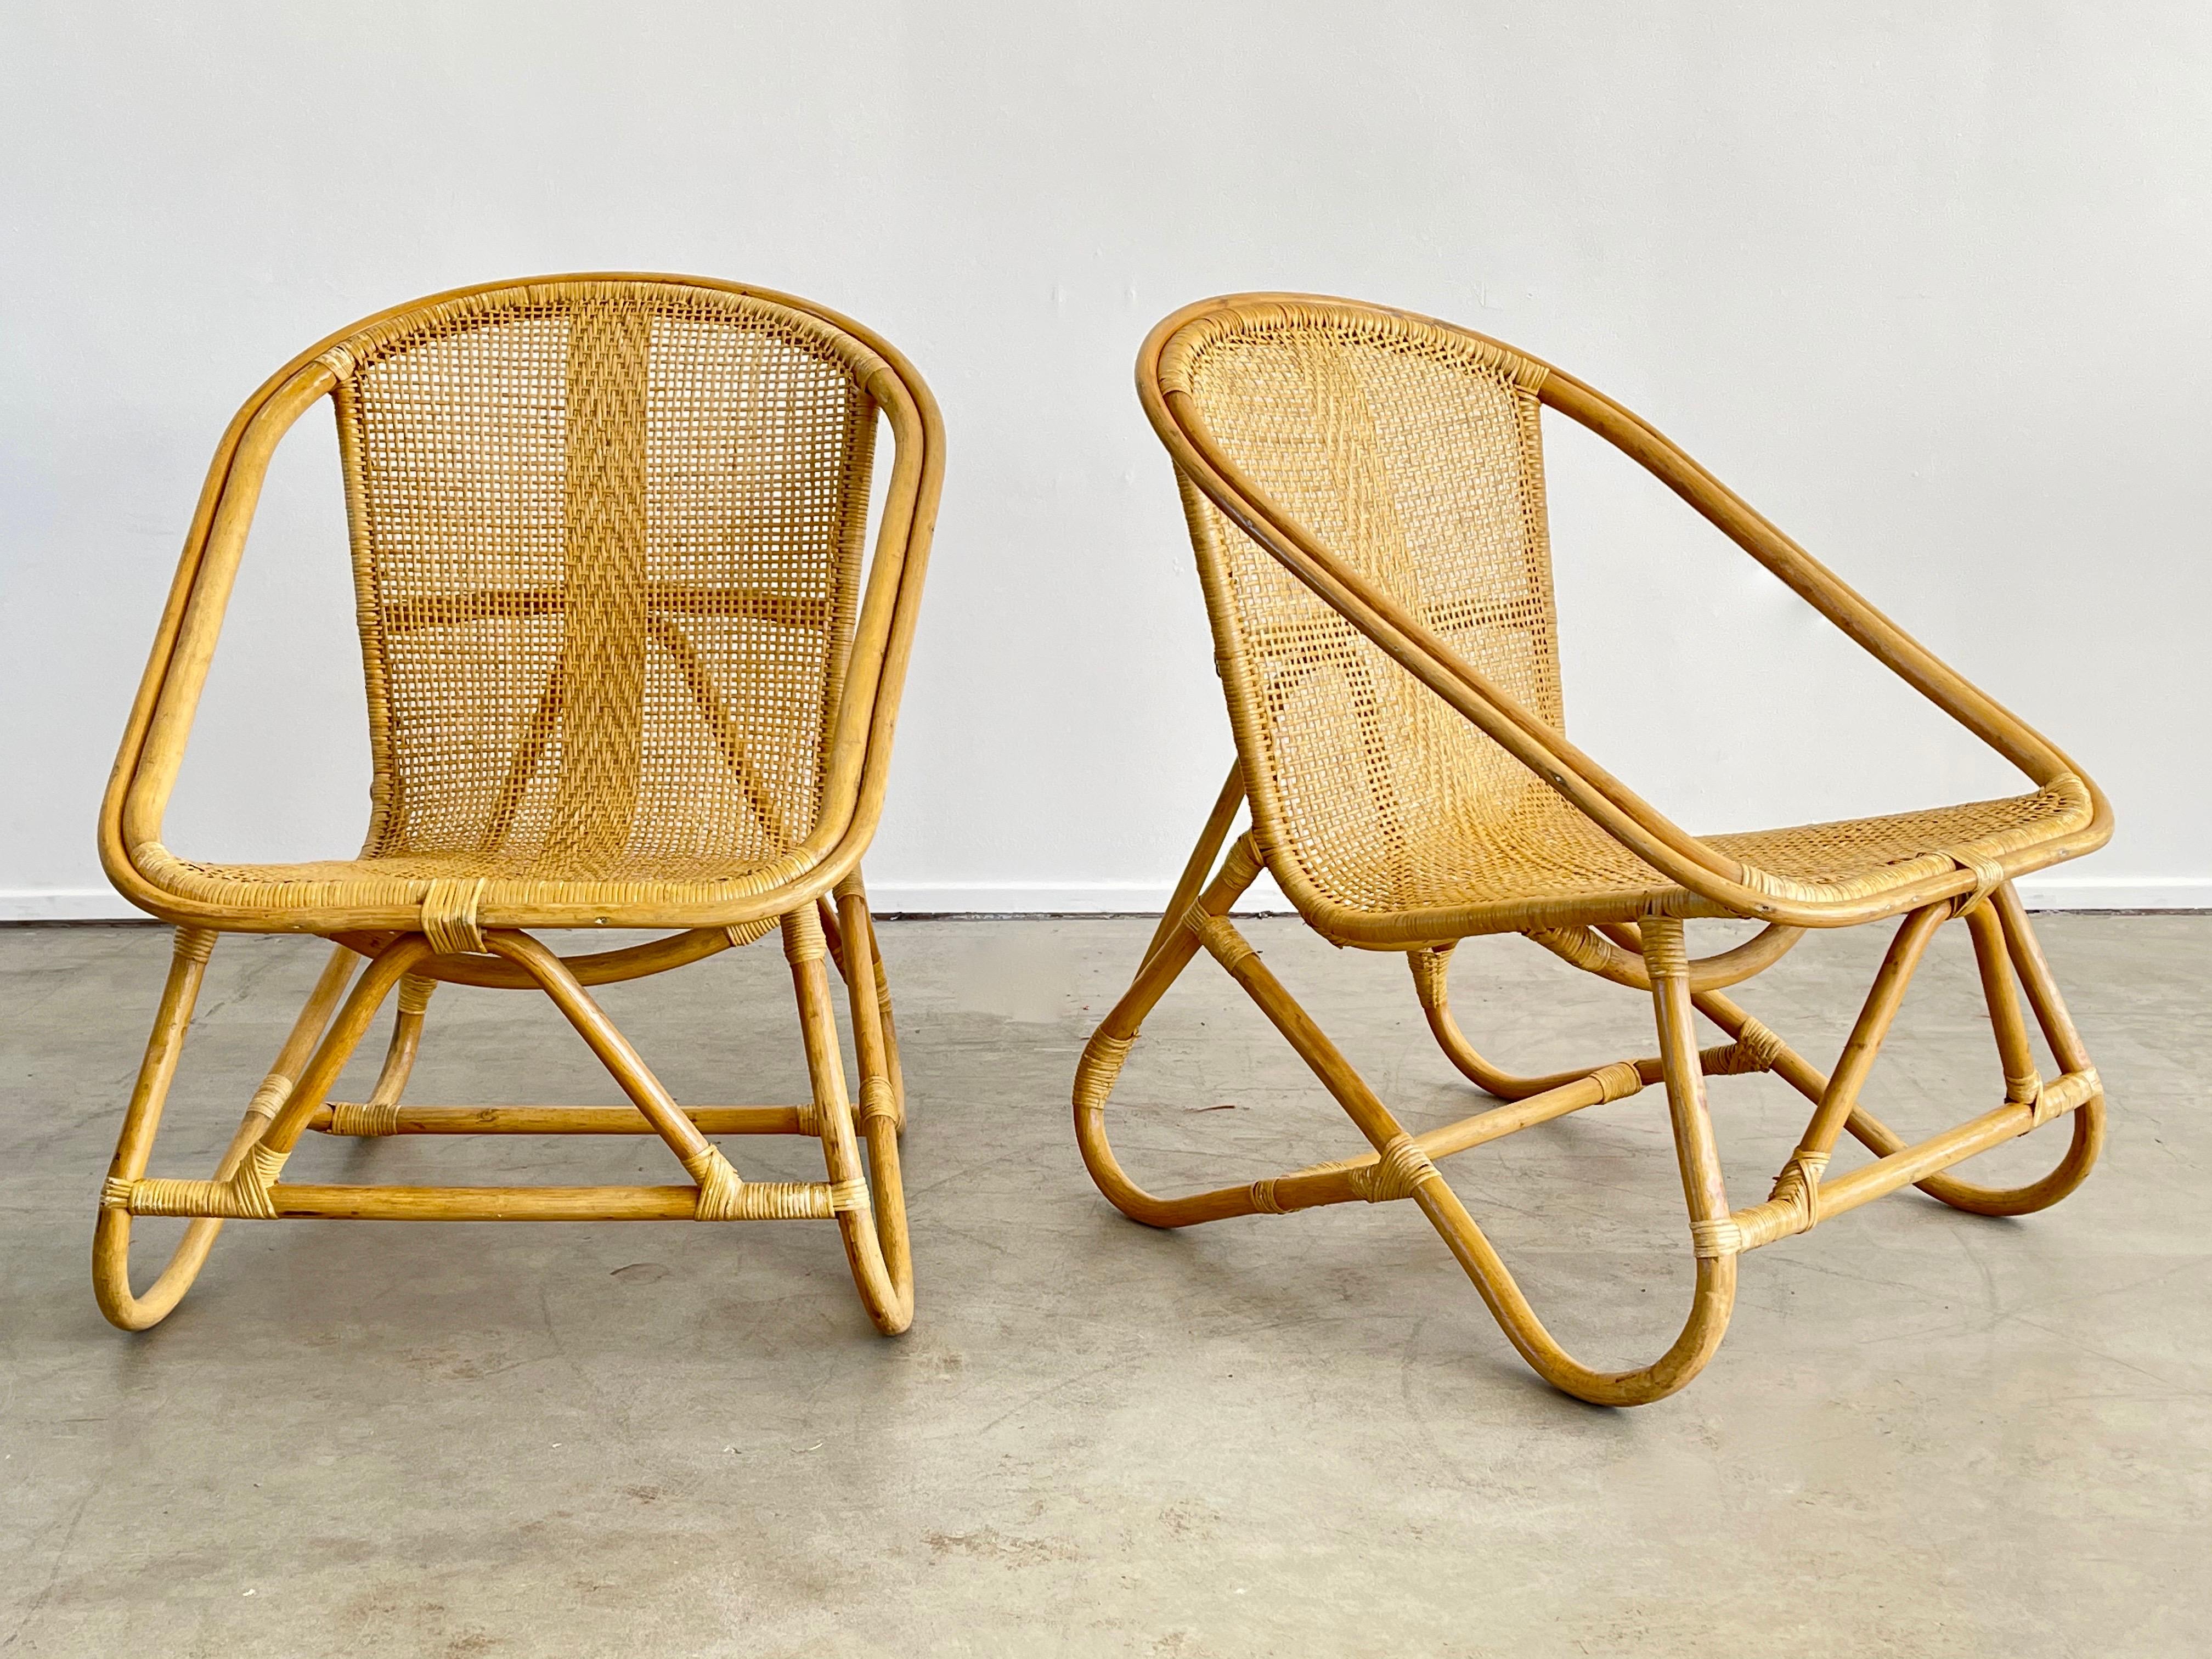 Wonderful pair of Italian bamboo and wicker chairs with great sculptural shape and profile.
Intricate design to wicker -
Set of 4 available, priced as a pair.